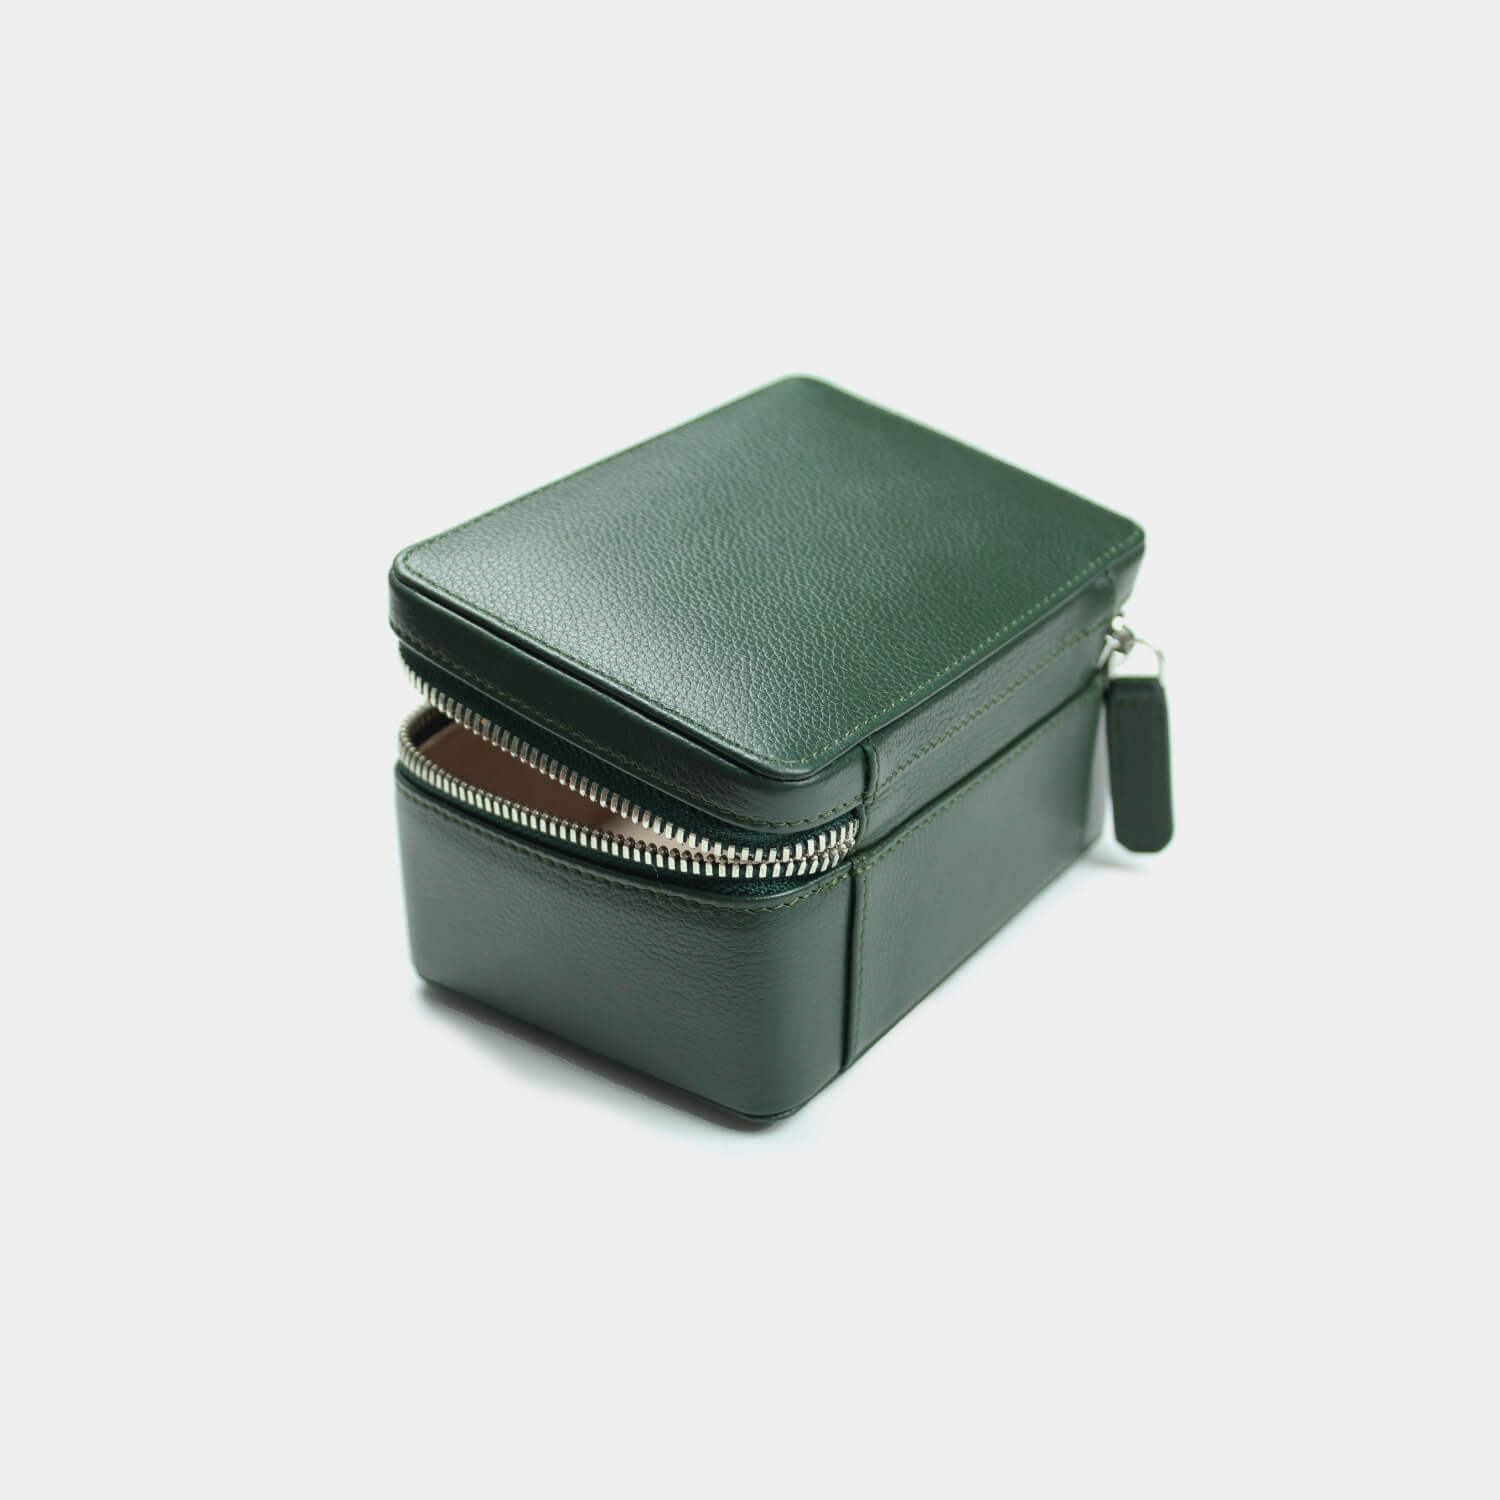 Fine grain leather medium rectangular jewellery case for valuables and cables, branded with your company logo